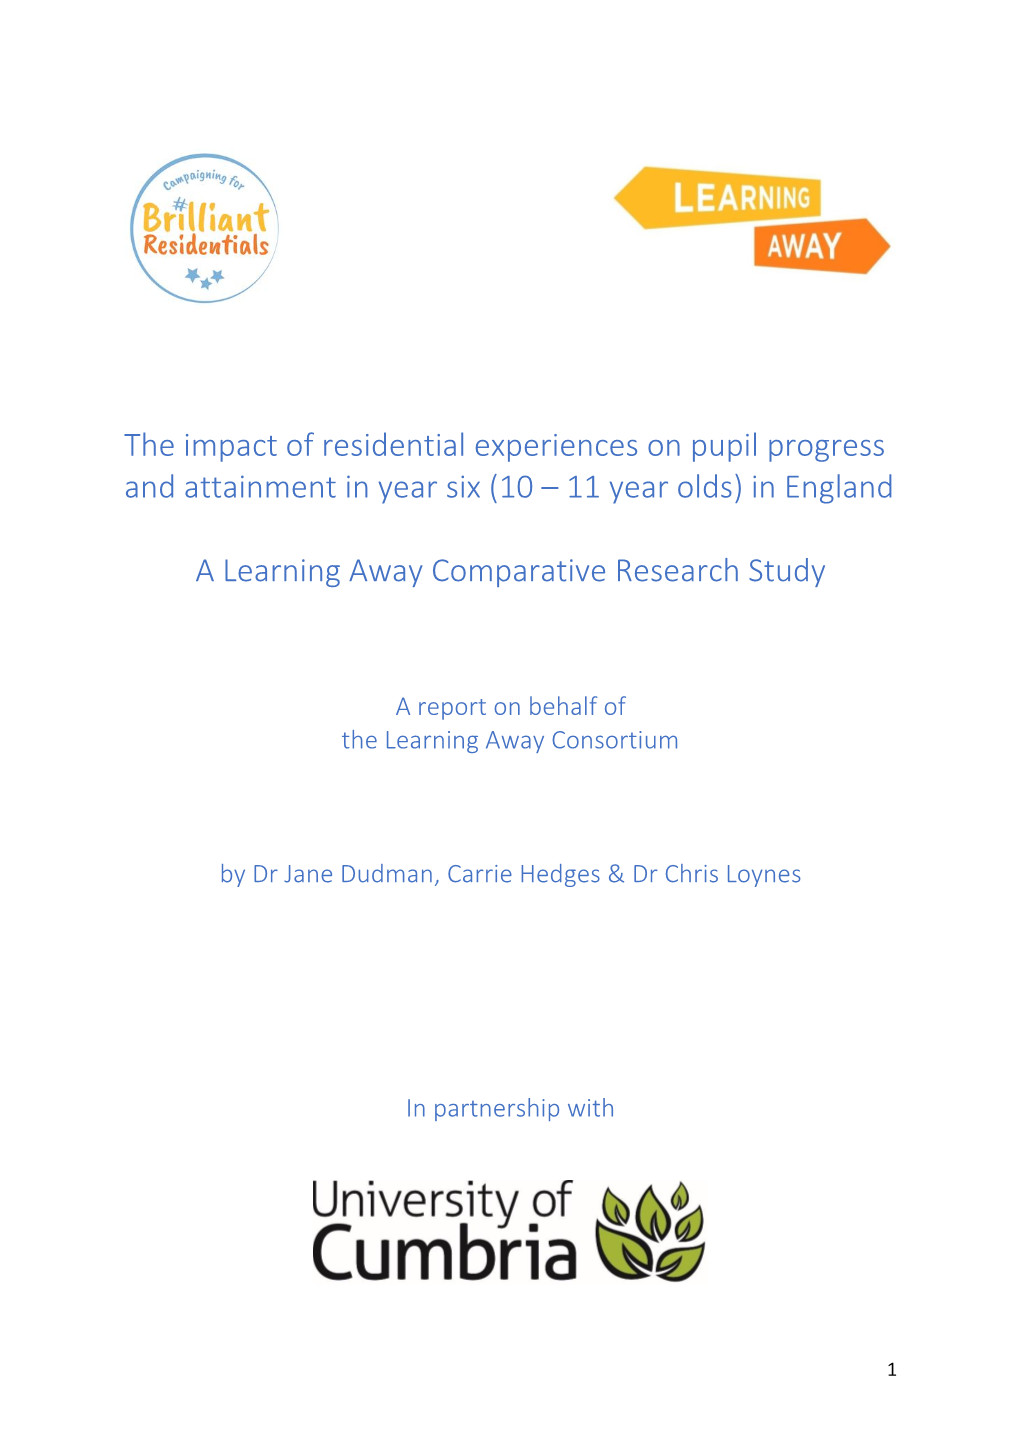 The Impact of Residential Experiences on Pupil Progress and Attainment in Year Six (10 – 11 Year Olds) in England